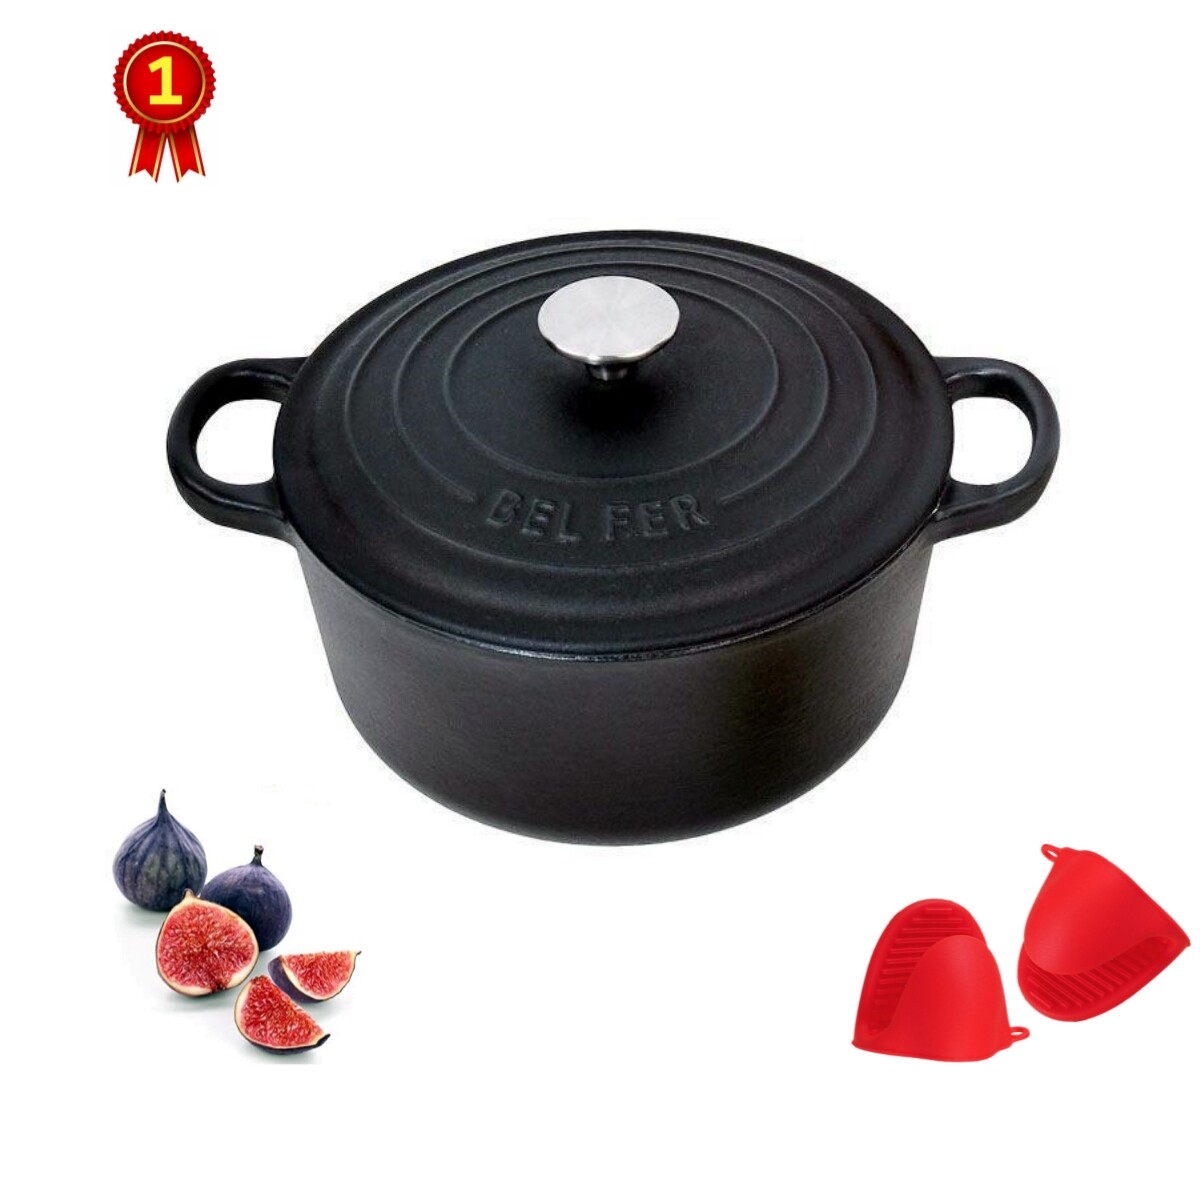 Overmont Cast Iron Dutch Oven with dual use Skillet lid for Oven,  Induction, Electric, Grill, Stovetop, (3.2QT Pot, 10.5 inches)